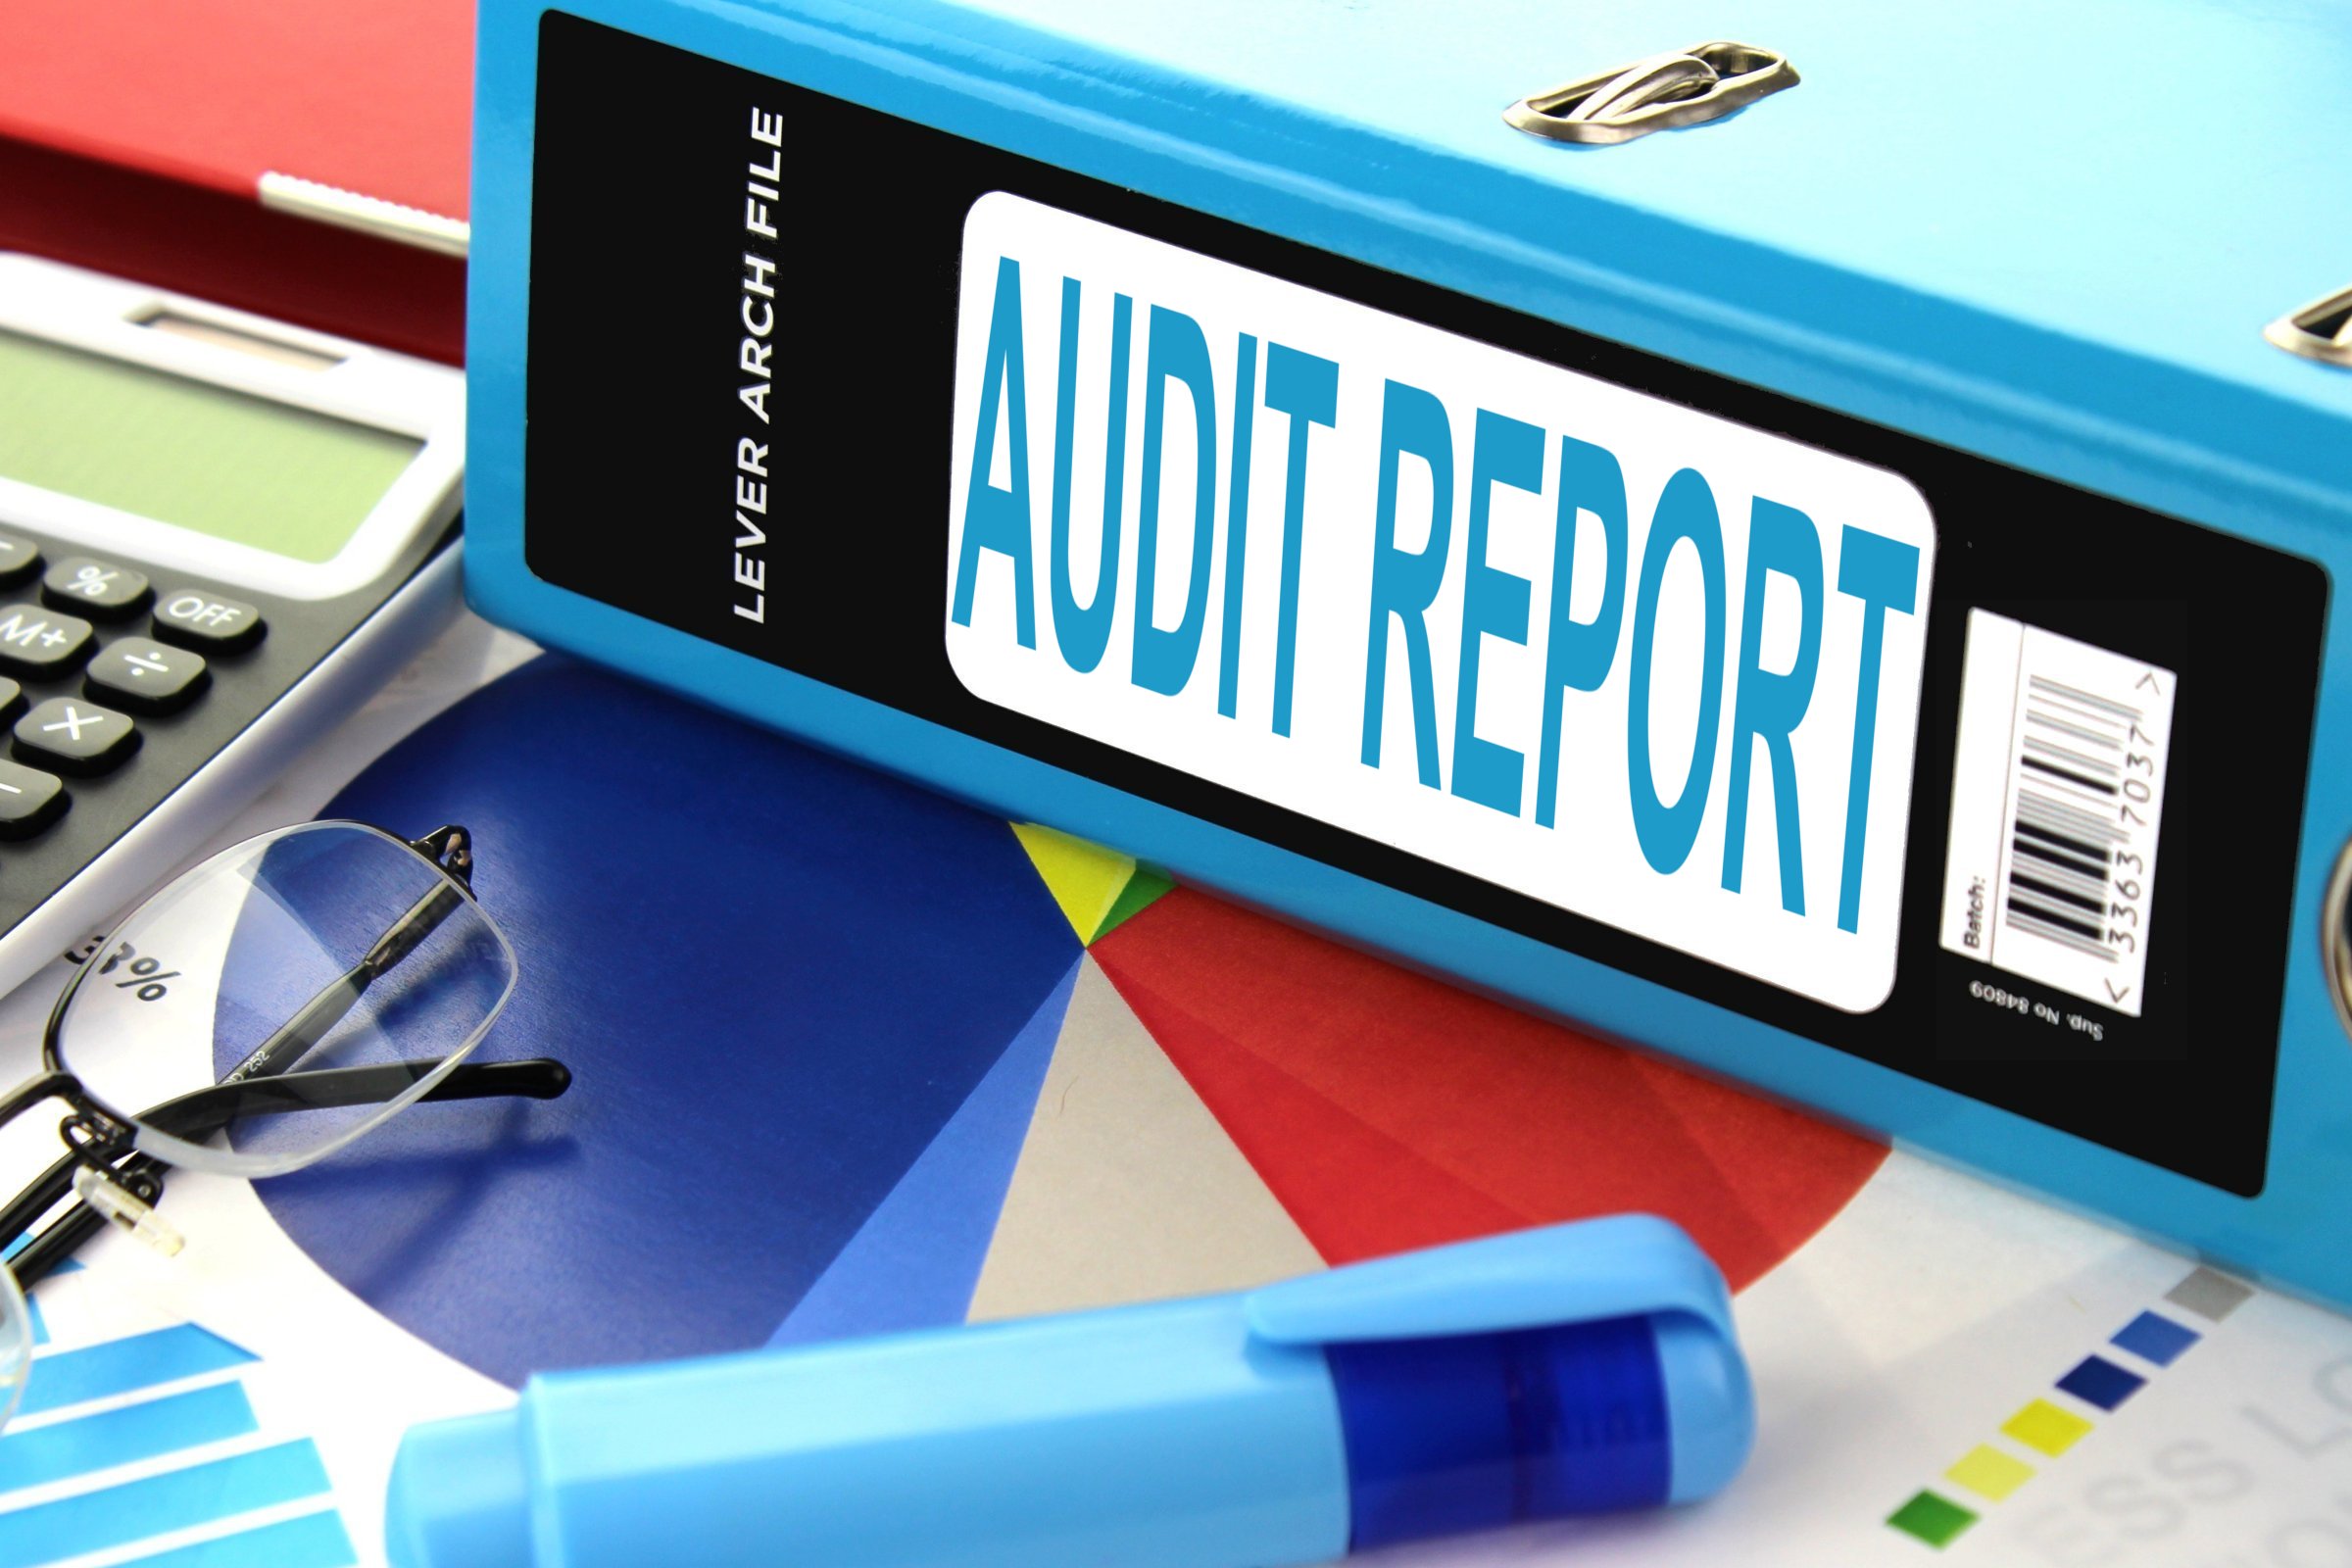 Audit Report Free of Charge Creative Commons Lever arch file image